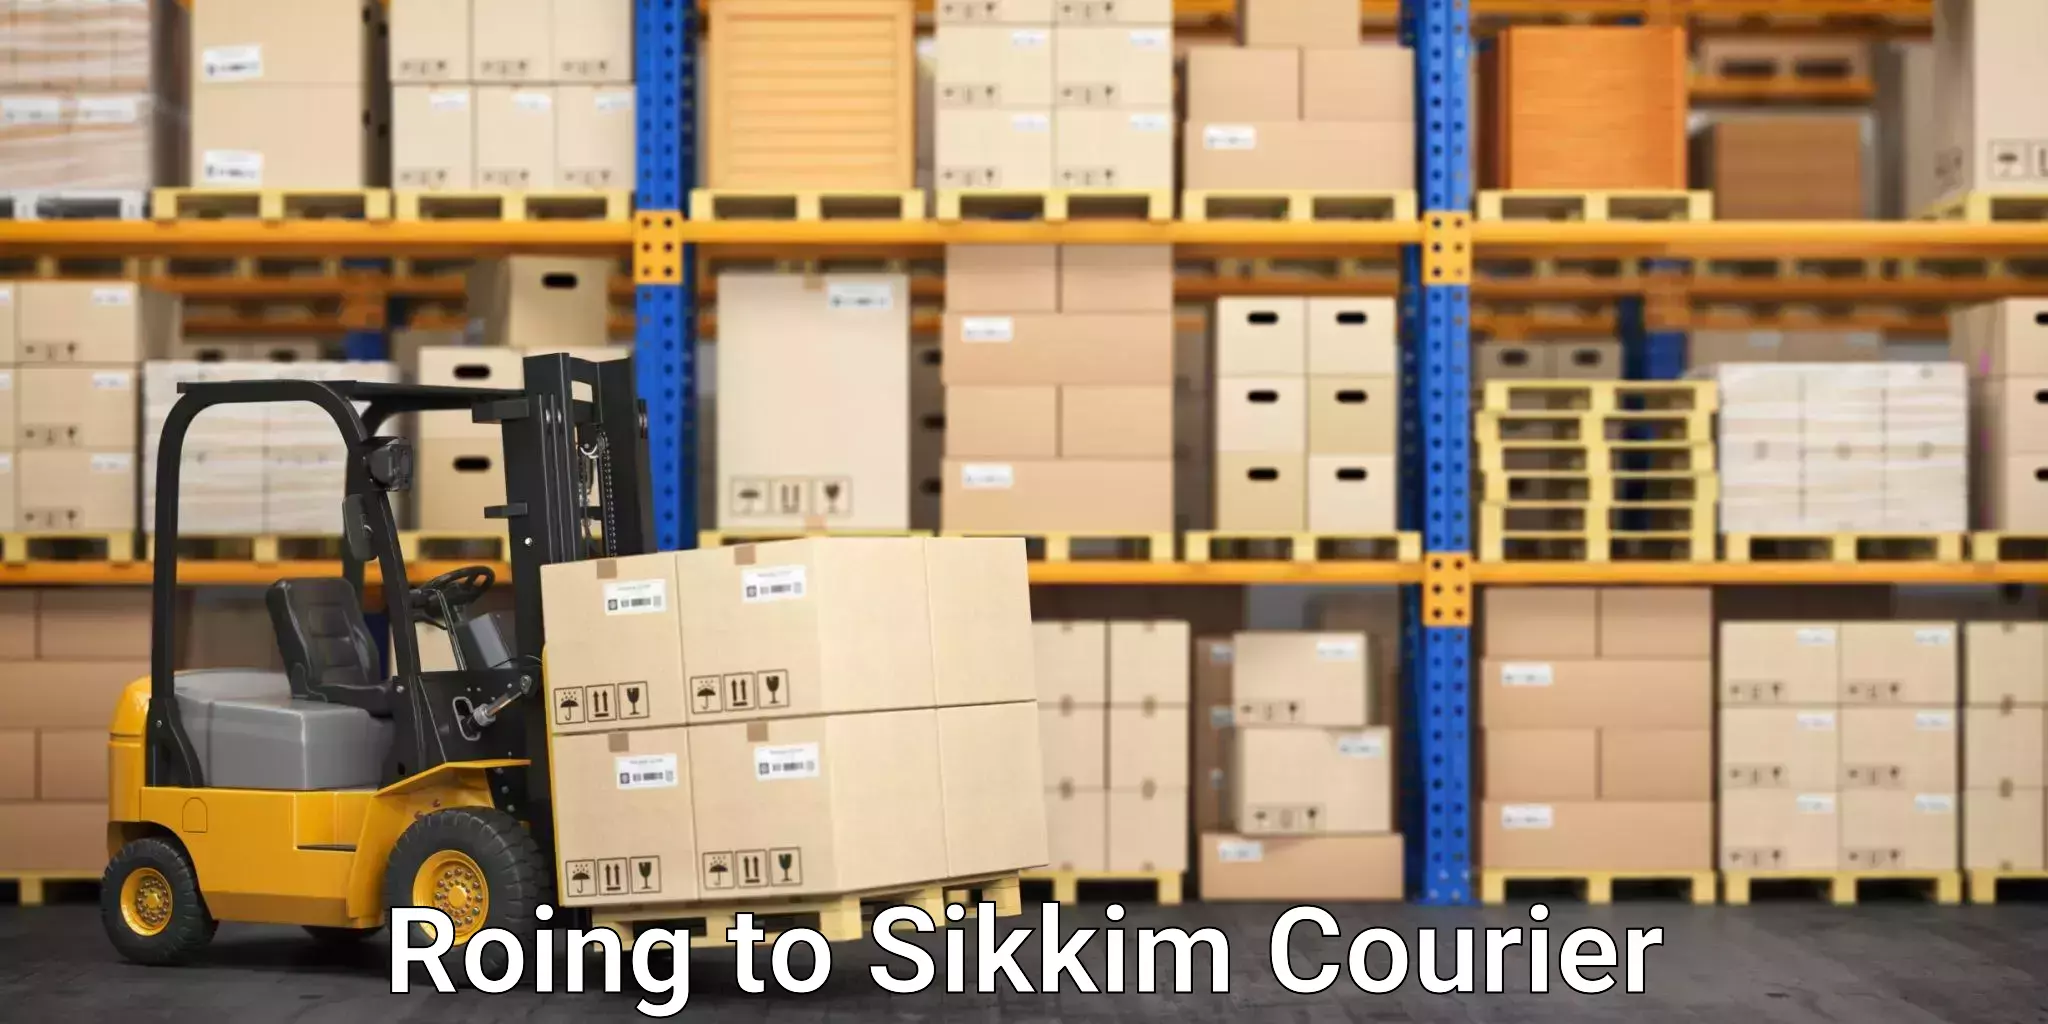 State-of-the-art courier technology Roing to Sikkim